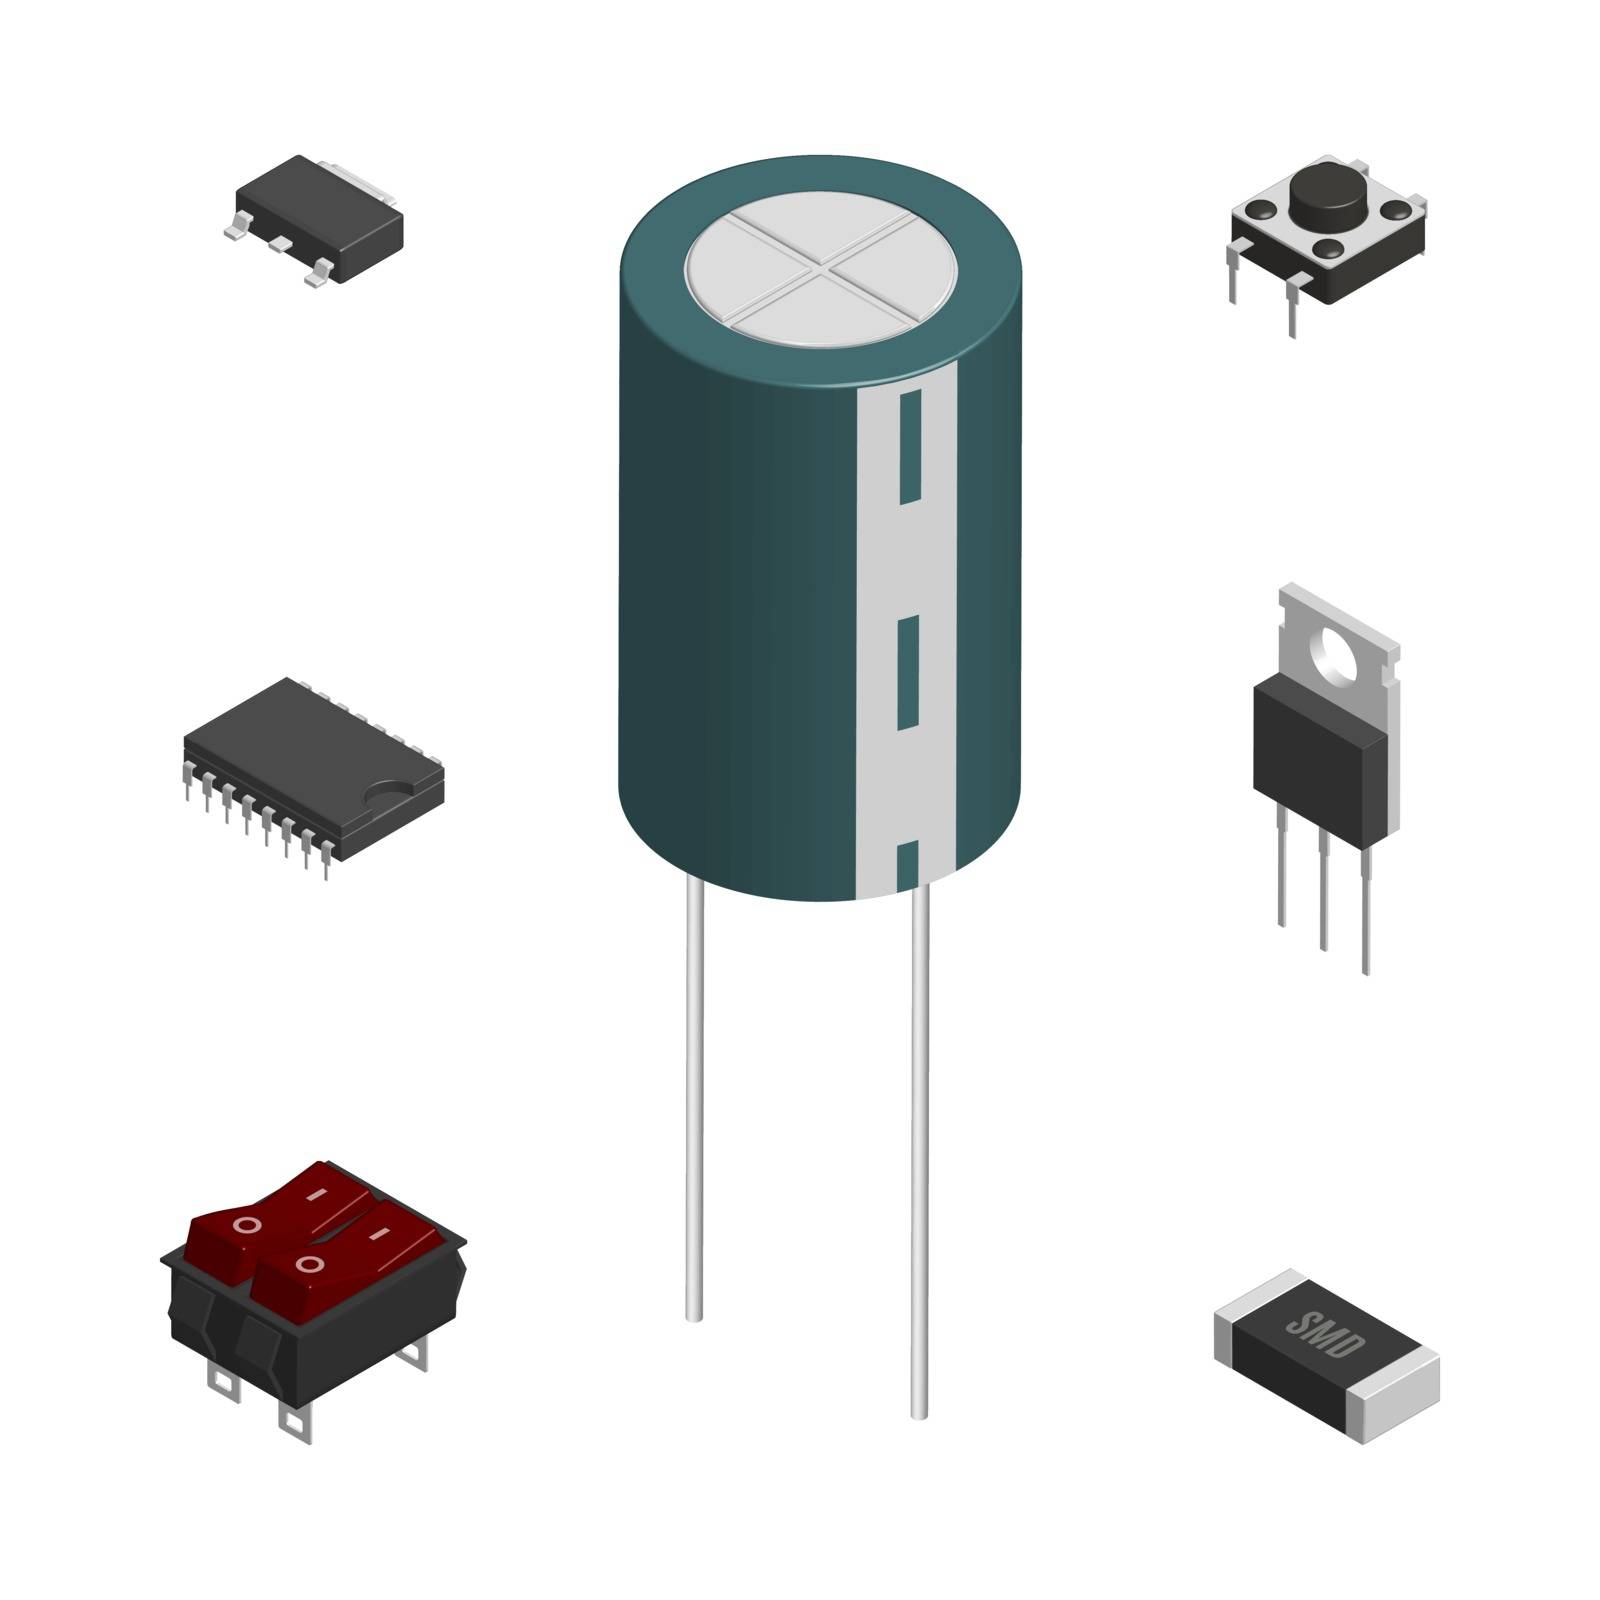 Set of different active and passive electronic components isolated on white background. Resistor, capacitor, diode, microcircuit, fuse and button. 3D isometric style, vector illustration.